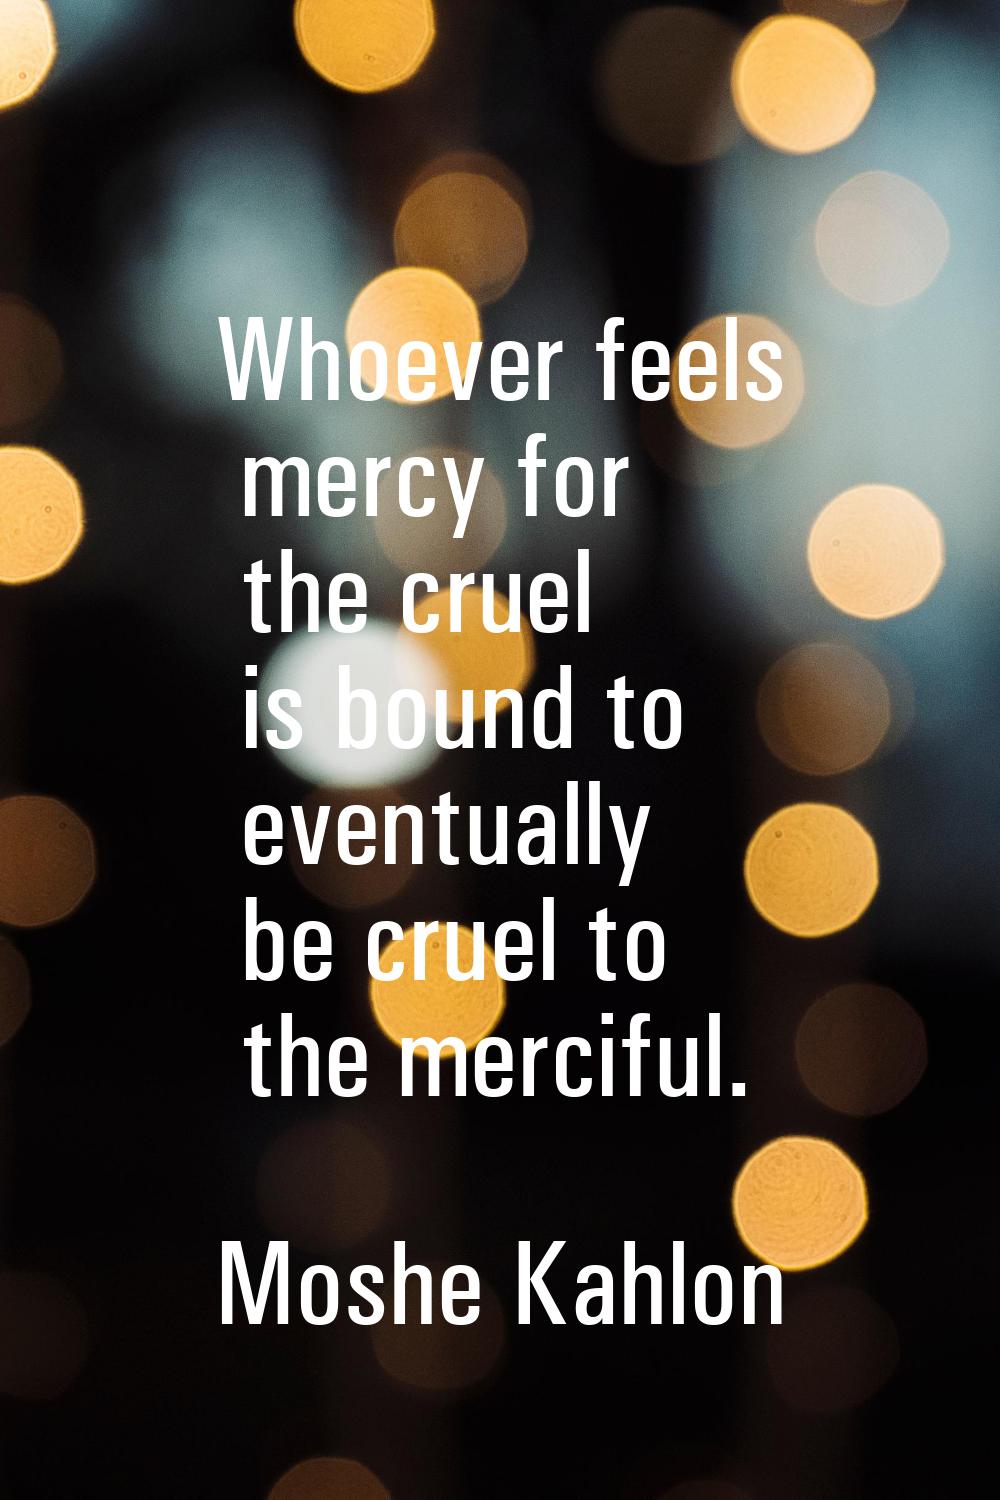 Whoever feels mercy for the cruel is bound to eventually be cruel to the merciful.